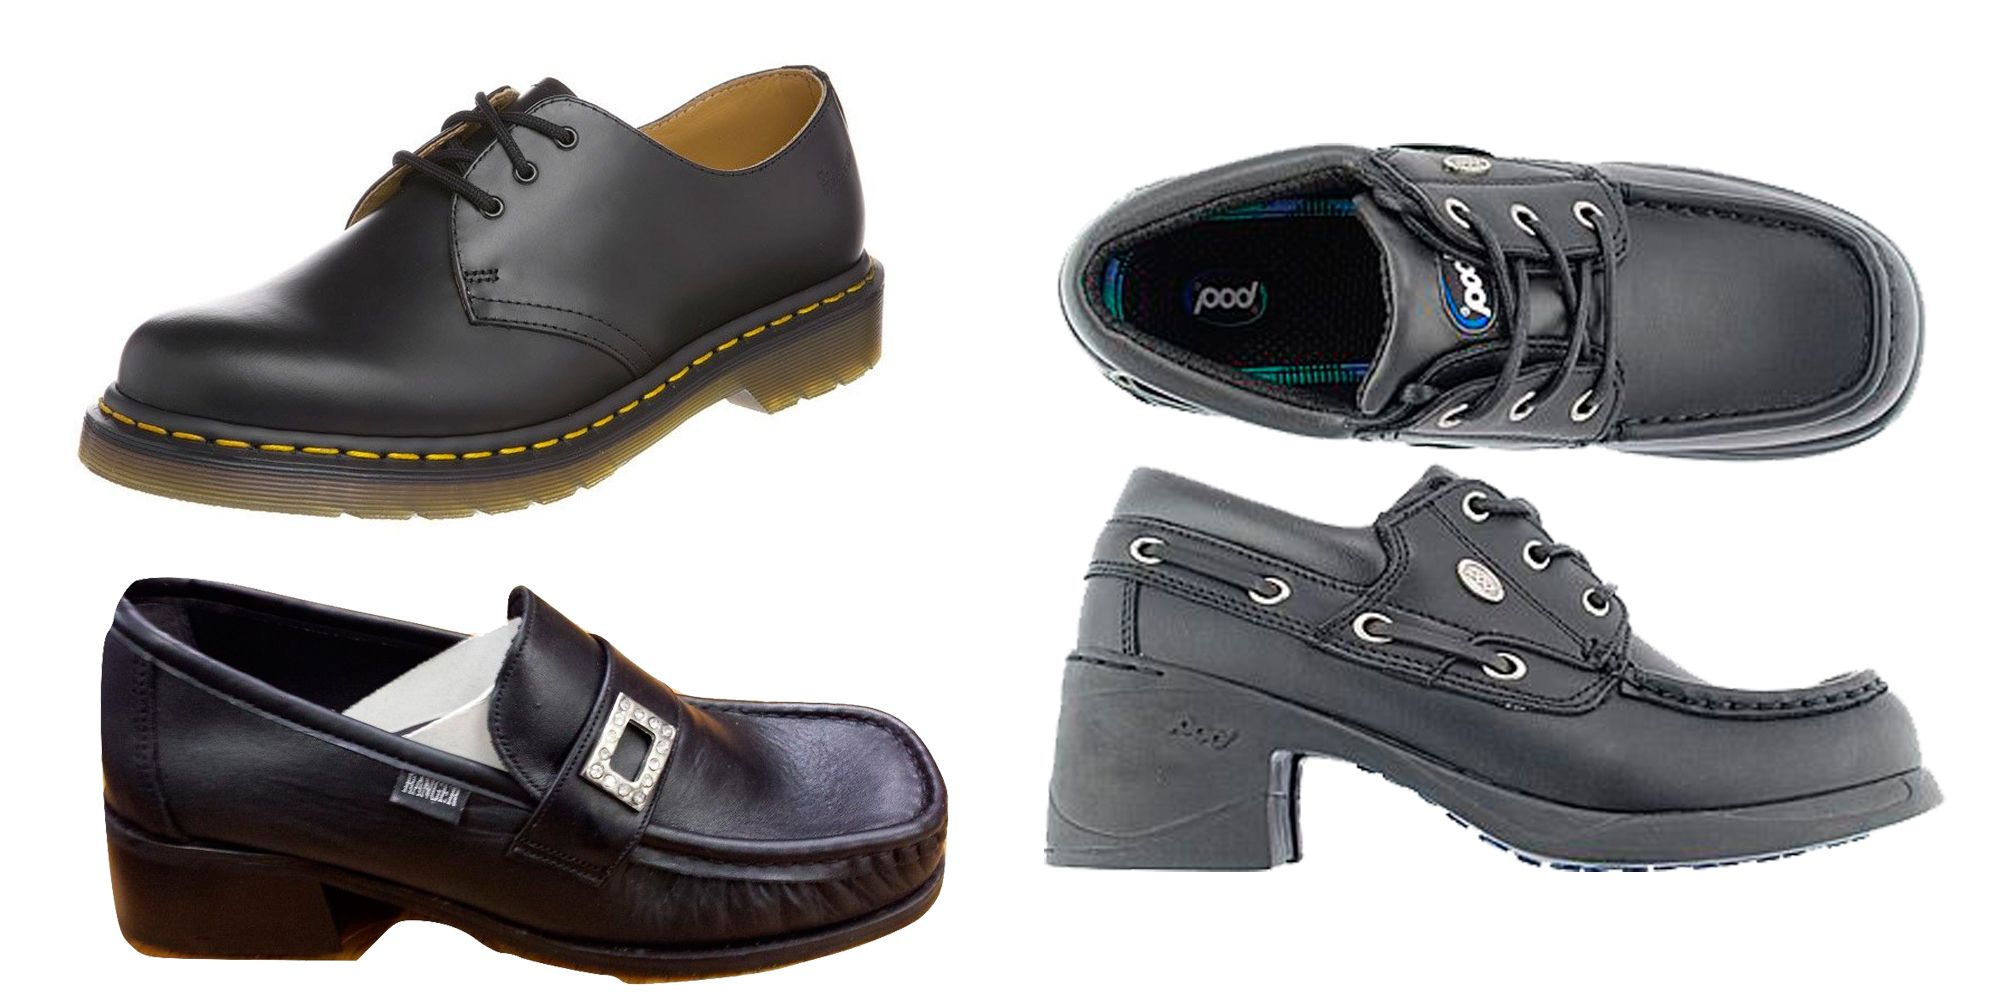 The school shoes all 90s/00s kids will 